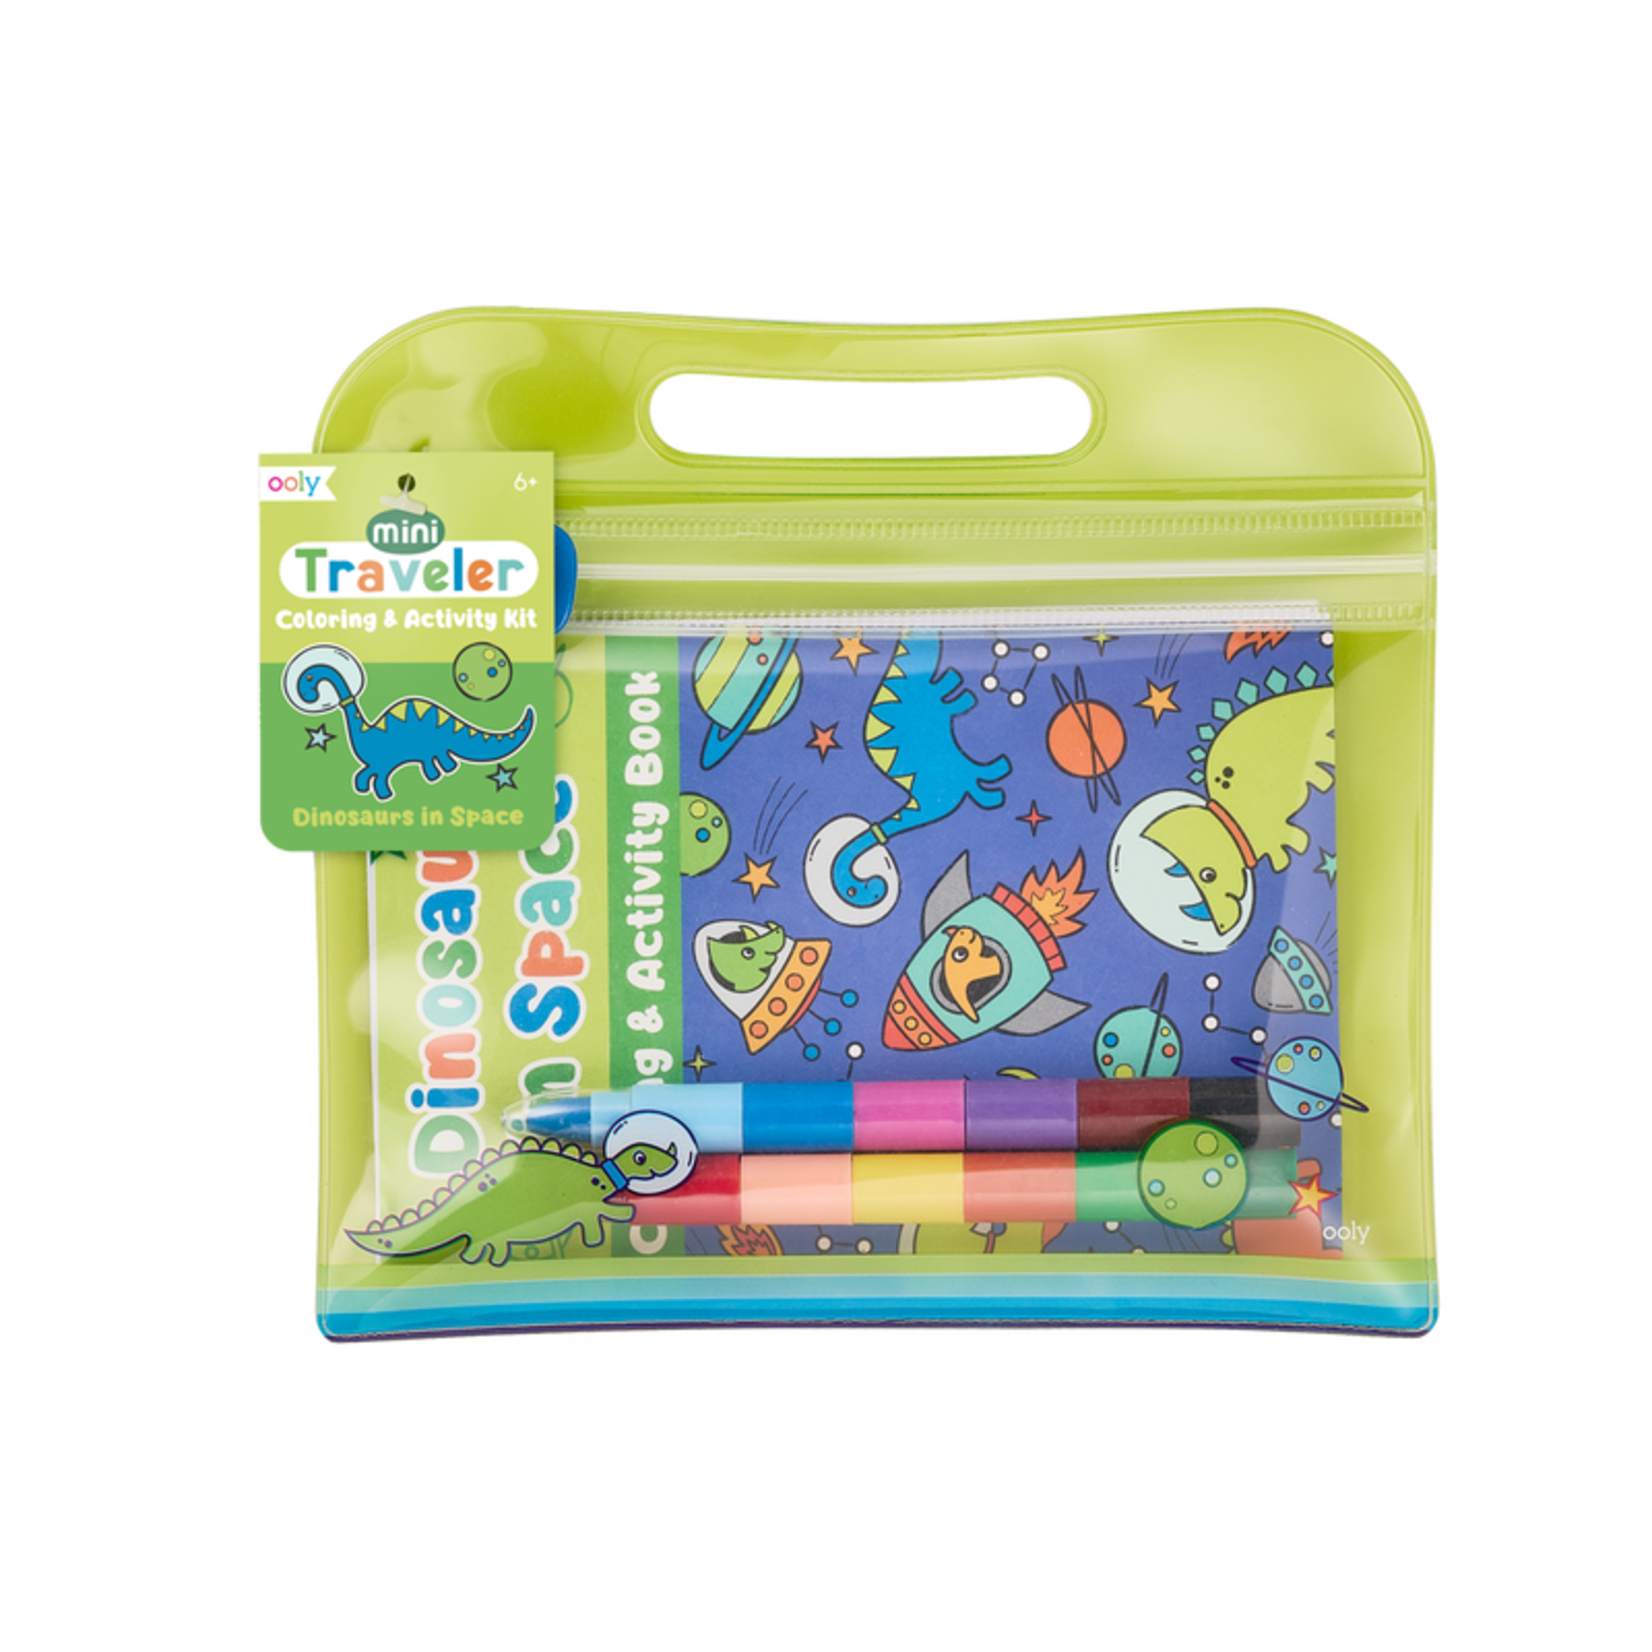 OOLY OOLY - Mini Traveler Coloring & Activity Kit -  Dinosaurs in Space